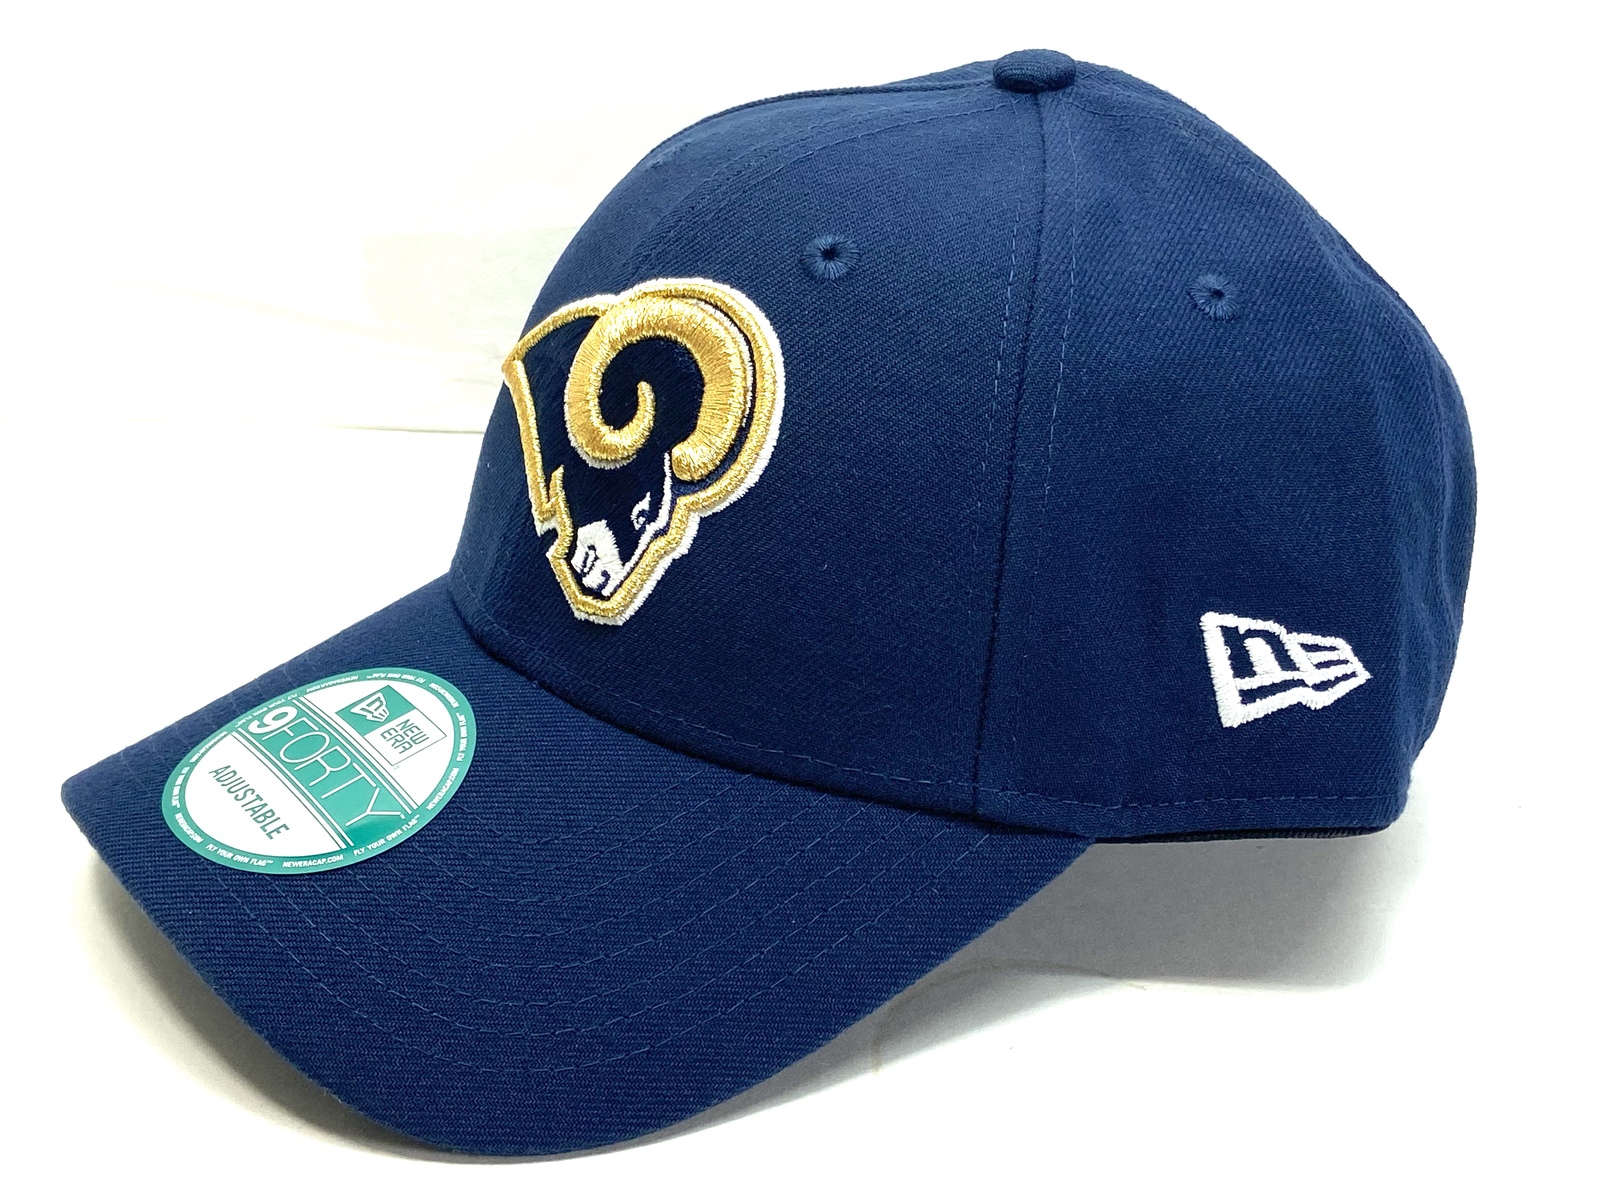 Primary image for Los Angeles Rams NFL 2018 Blue 9Forty Adjustable Embroidered Logo Cap by New Era